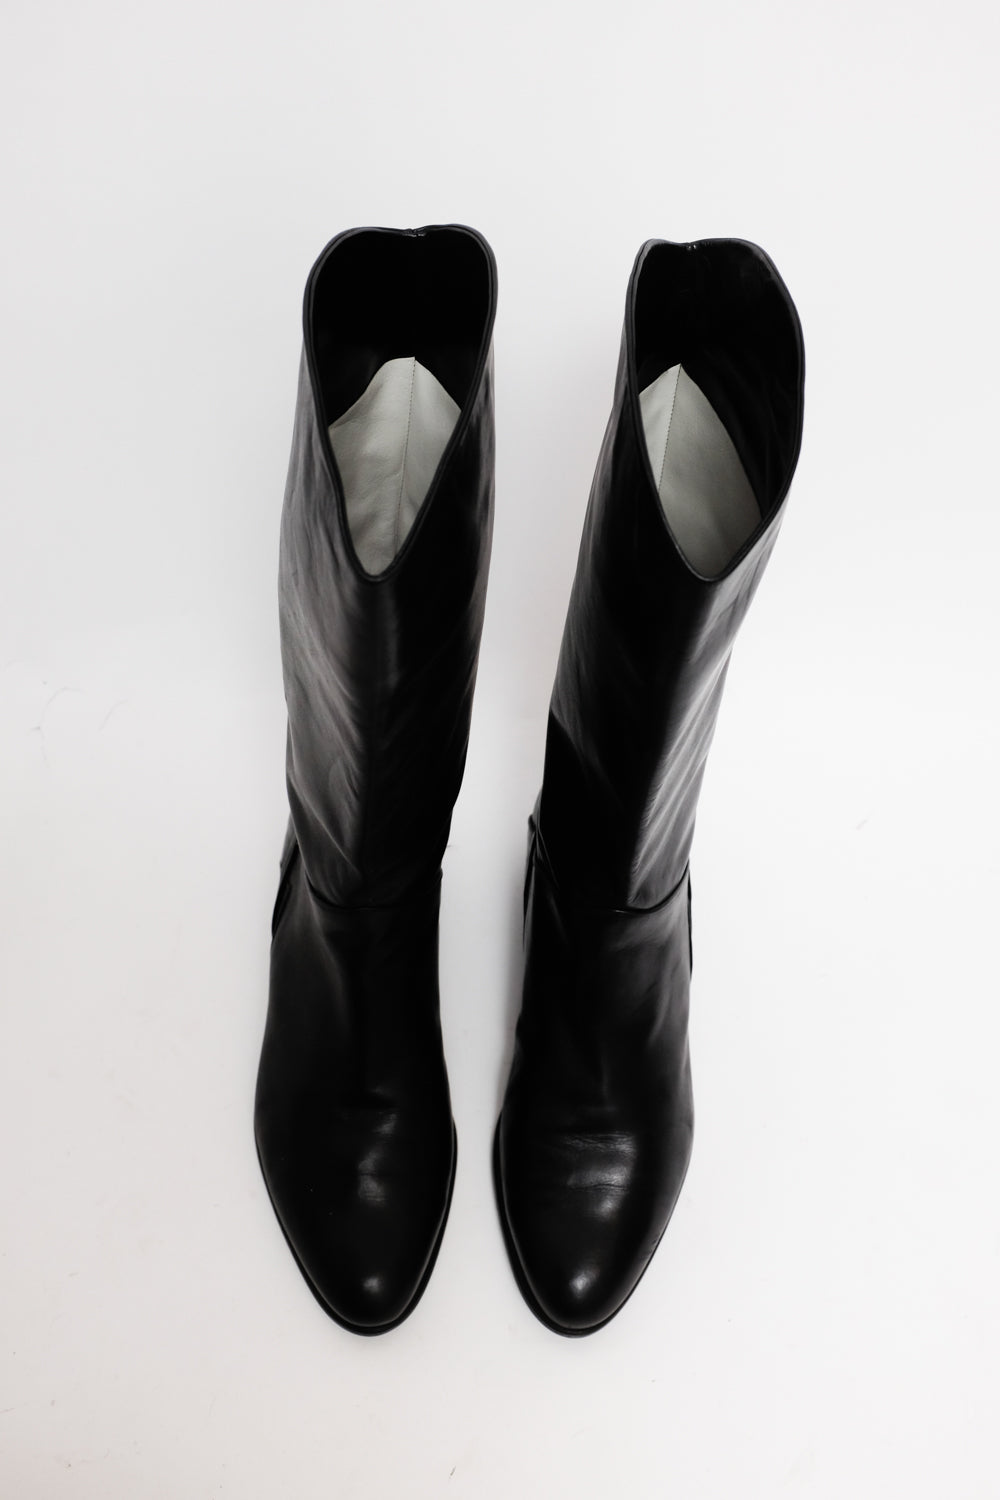 BLACK ITALY LEATHER BOOTS 39